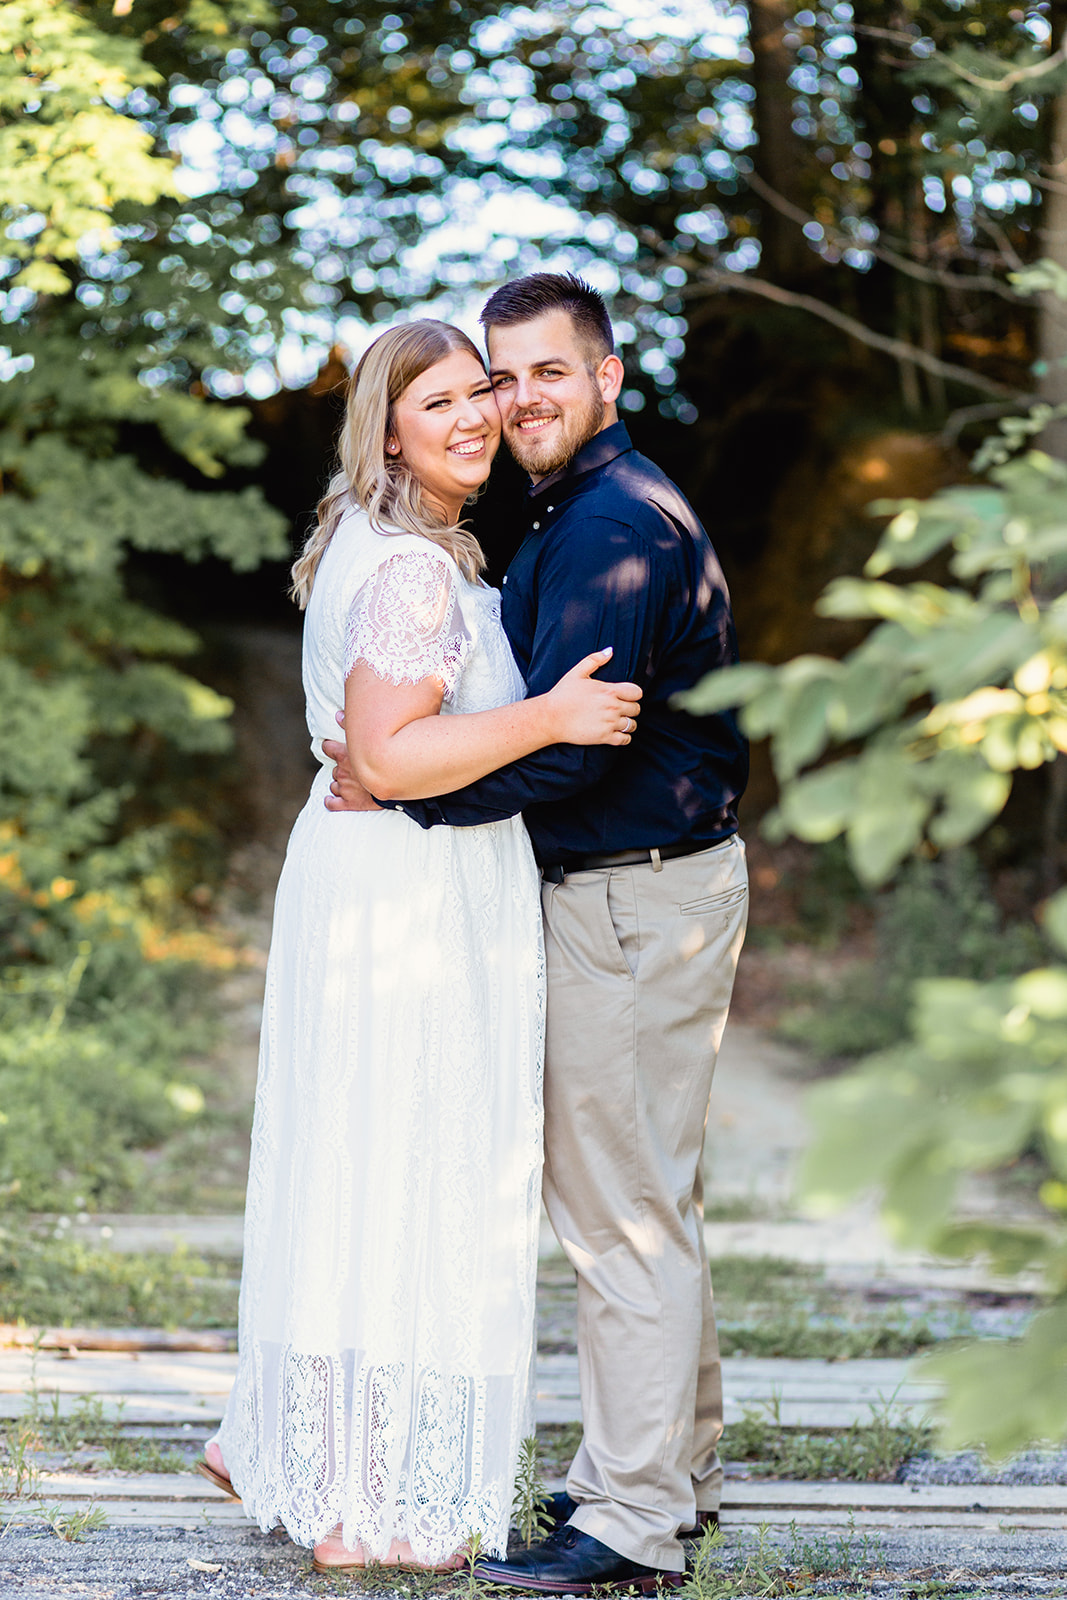 A late summer engagement session held at Arlington Acres in Tiffin, Ohio.